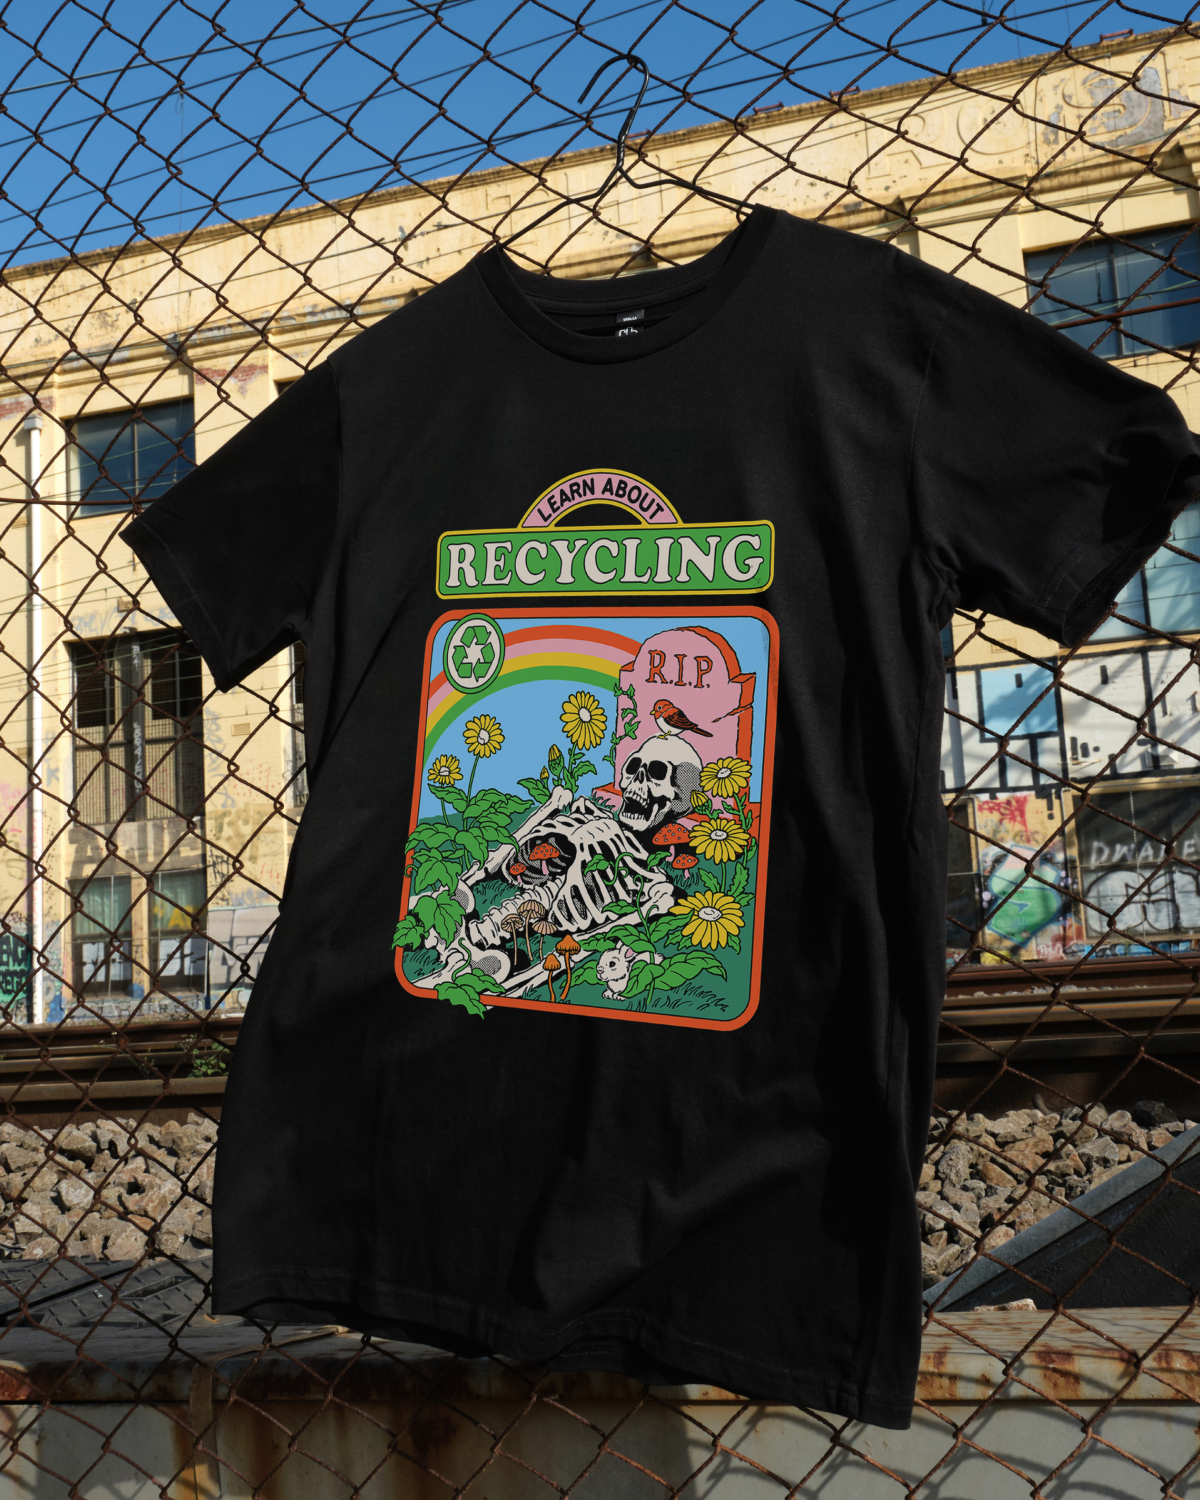 Learn About Recycling  T-Shirt Europe Online